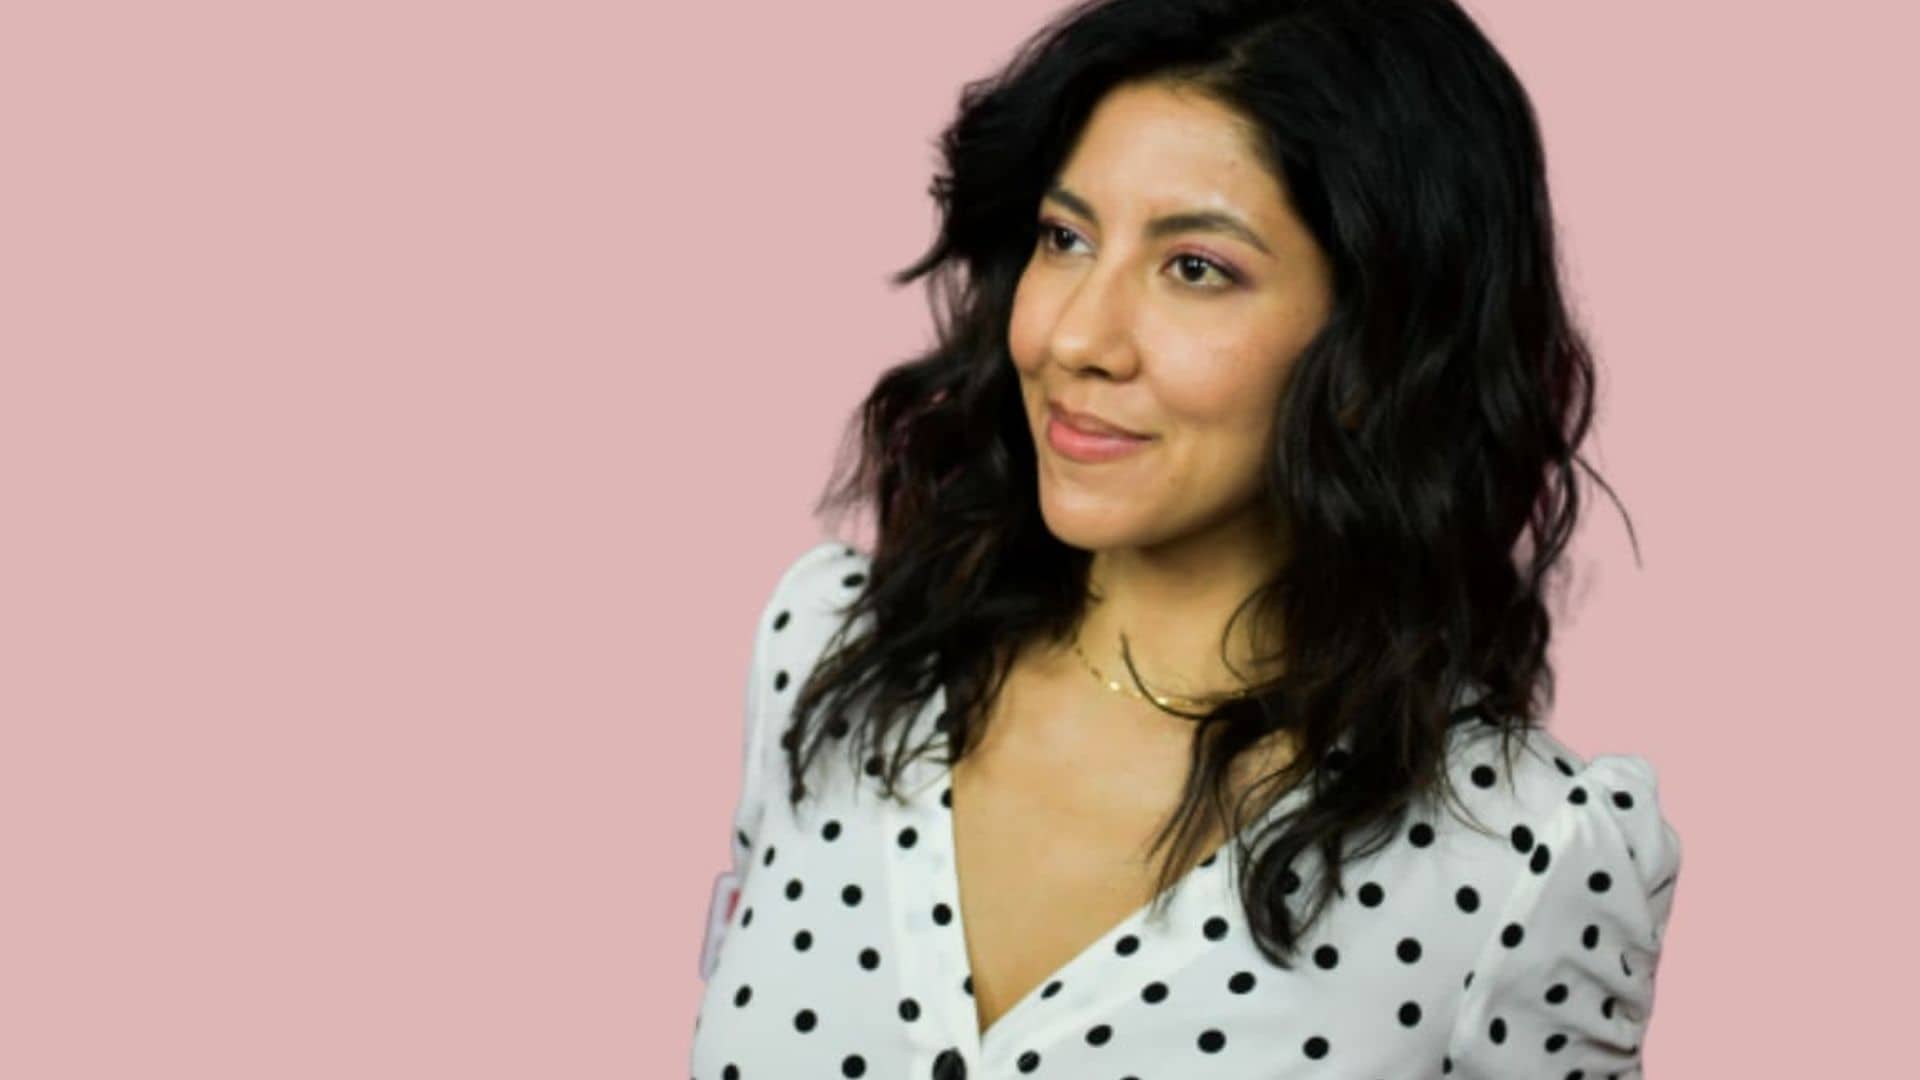 ‘In the Heights’ star Stephanie Beatriz is excited for everyone to see the movie, especially Marc Anthony’s role